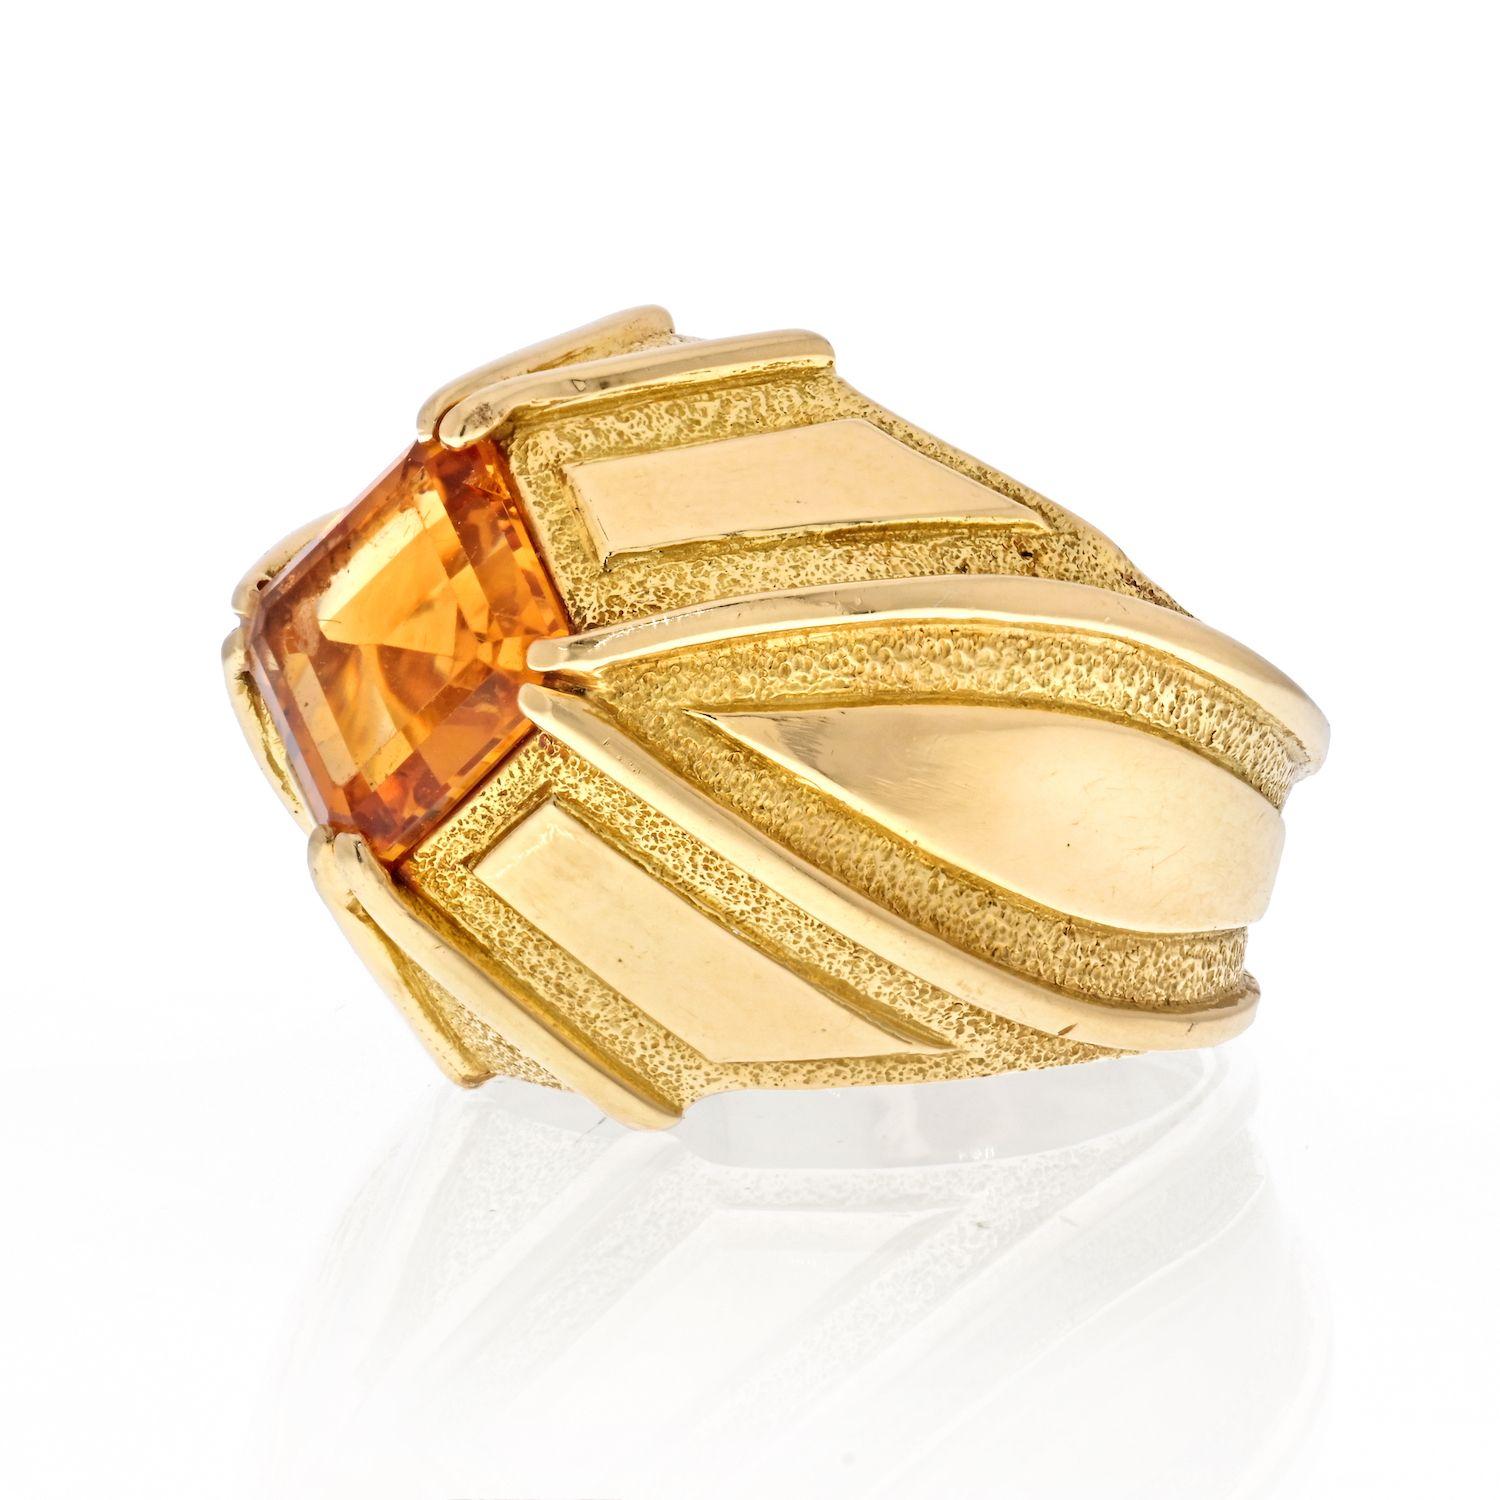 An asscher cut citrine enclosed in a yellow gold mounting designed by Jean Schlumberger.
Lovely everyday ring, that speaks character and looks like something was passed down to you for generations. The best part is that this is not just another